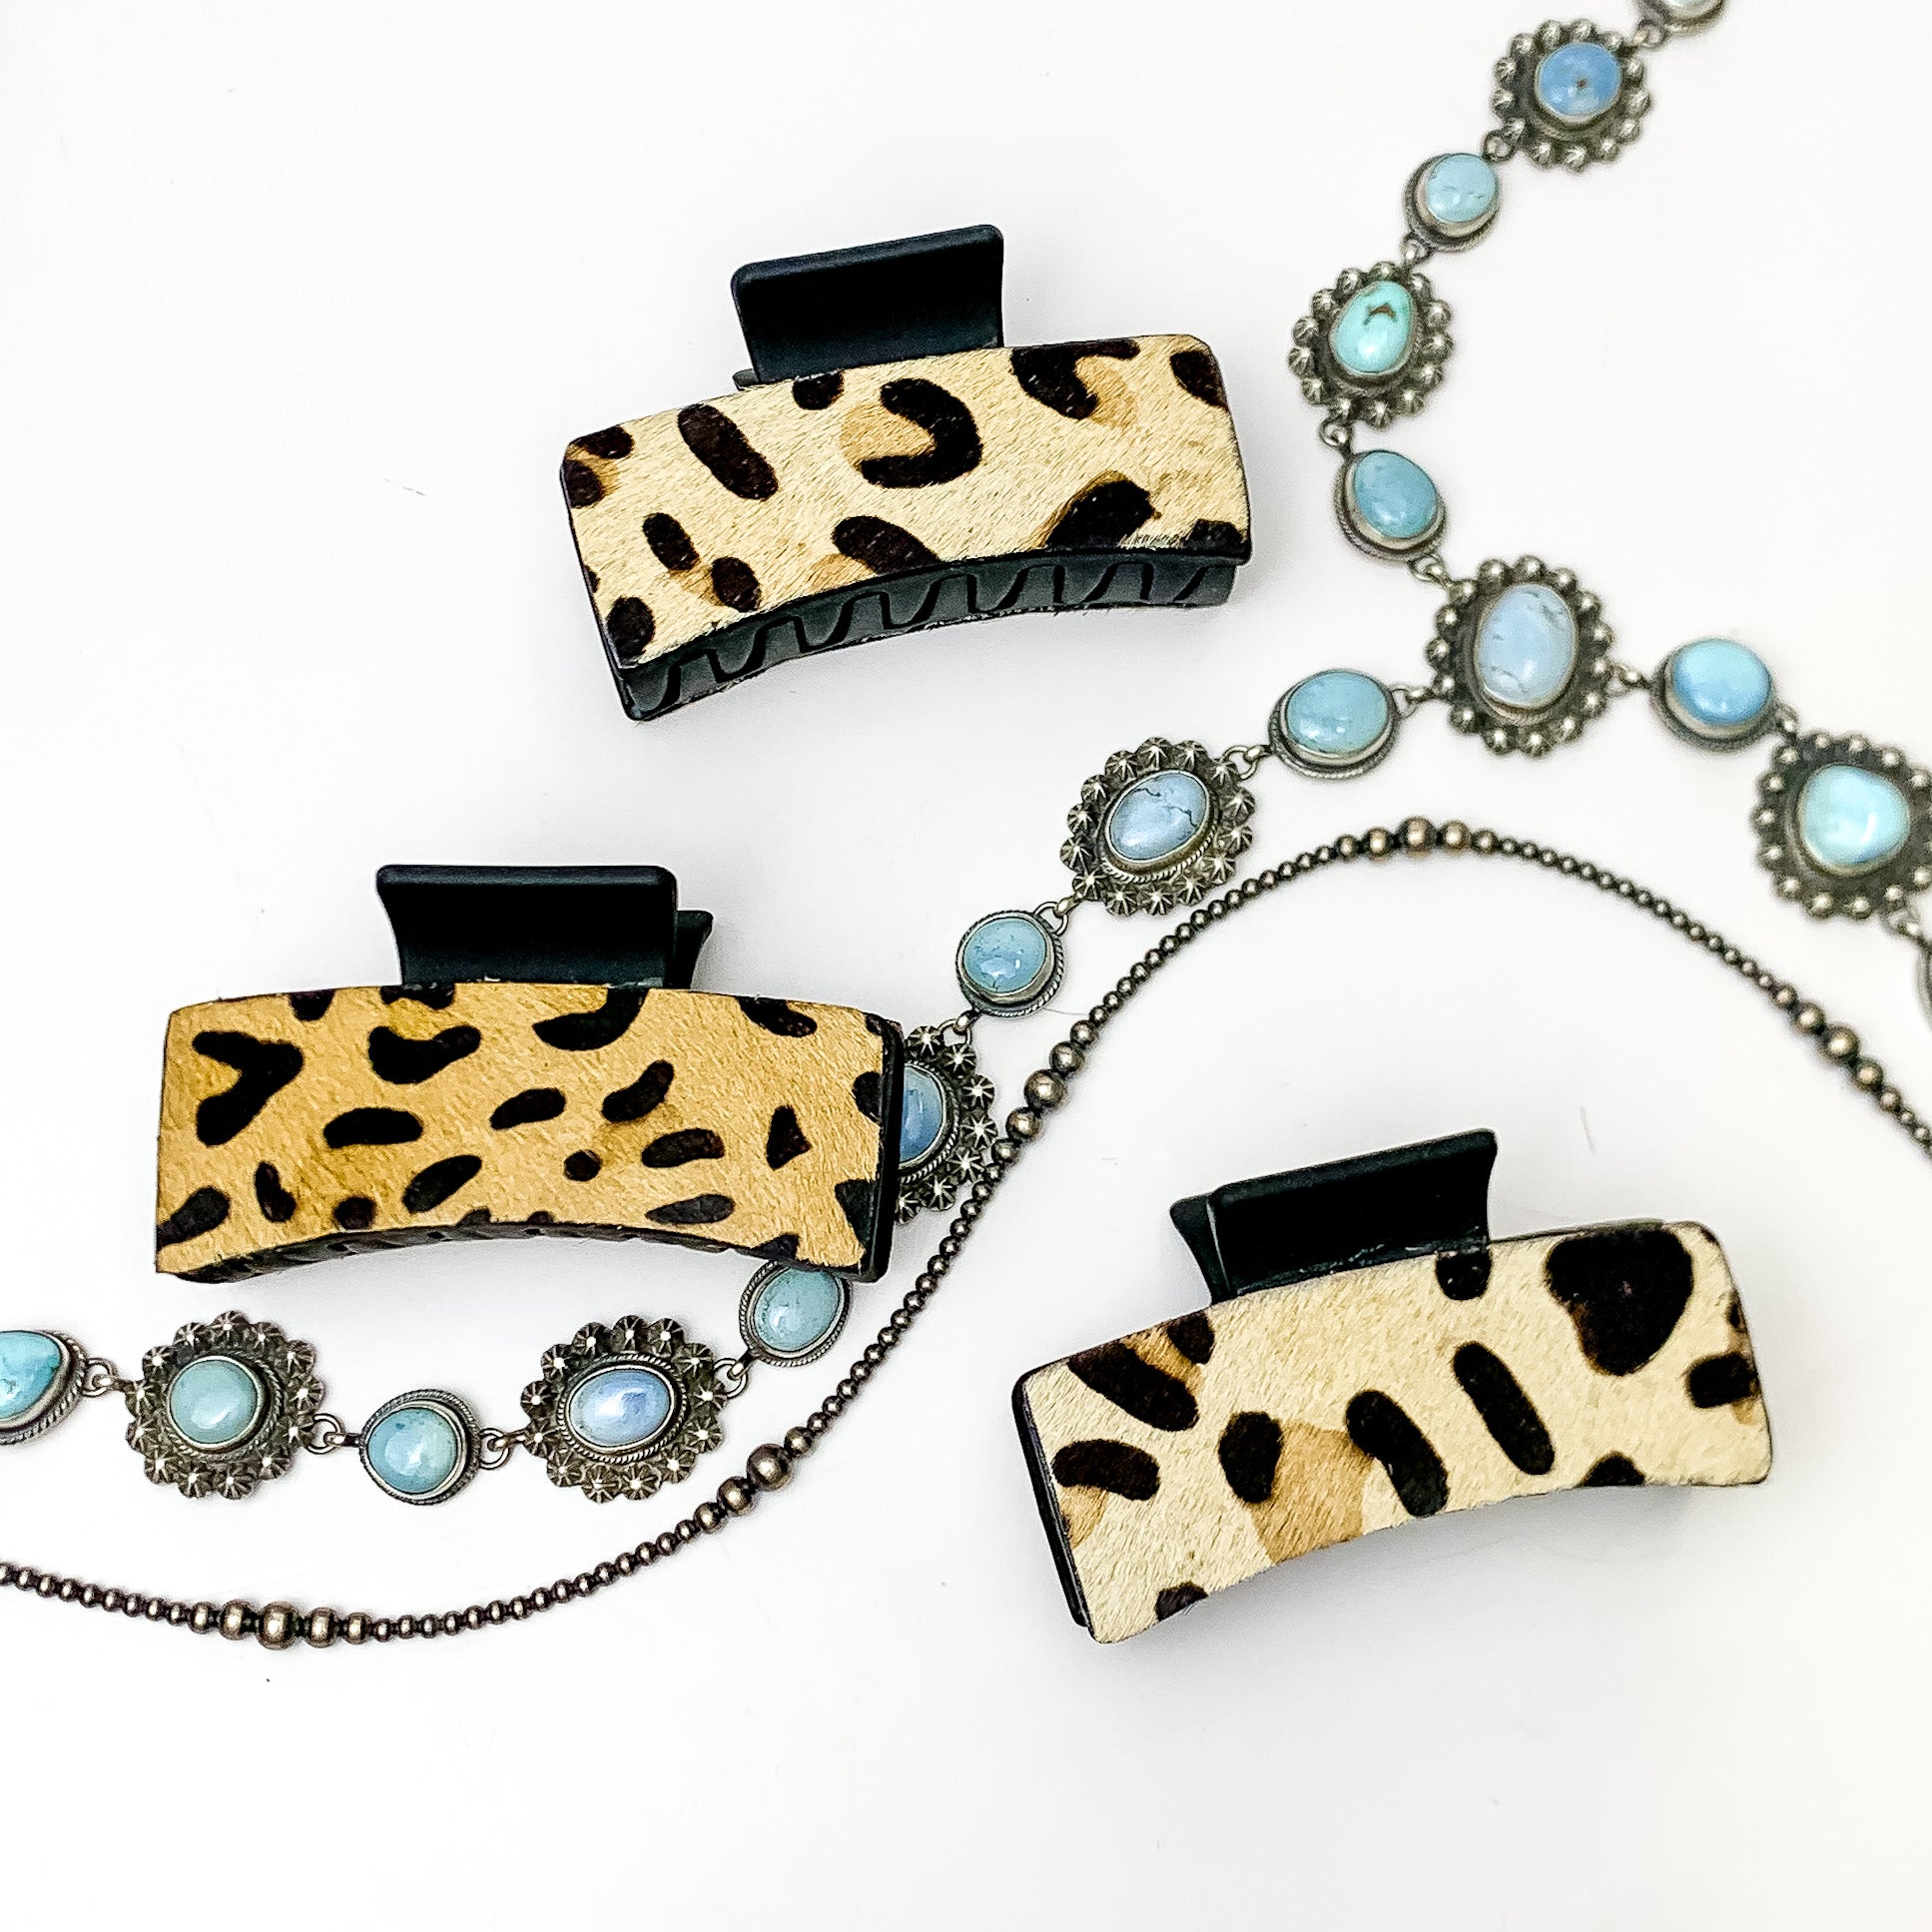 Pictured are three black hair clips with leopard print hide patches. These earrings are pictured on a white background with silver necklaces under the clips. 